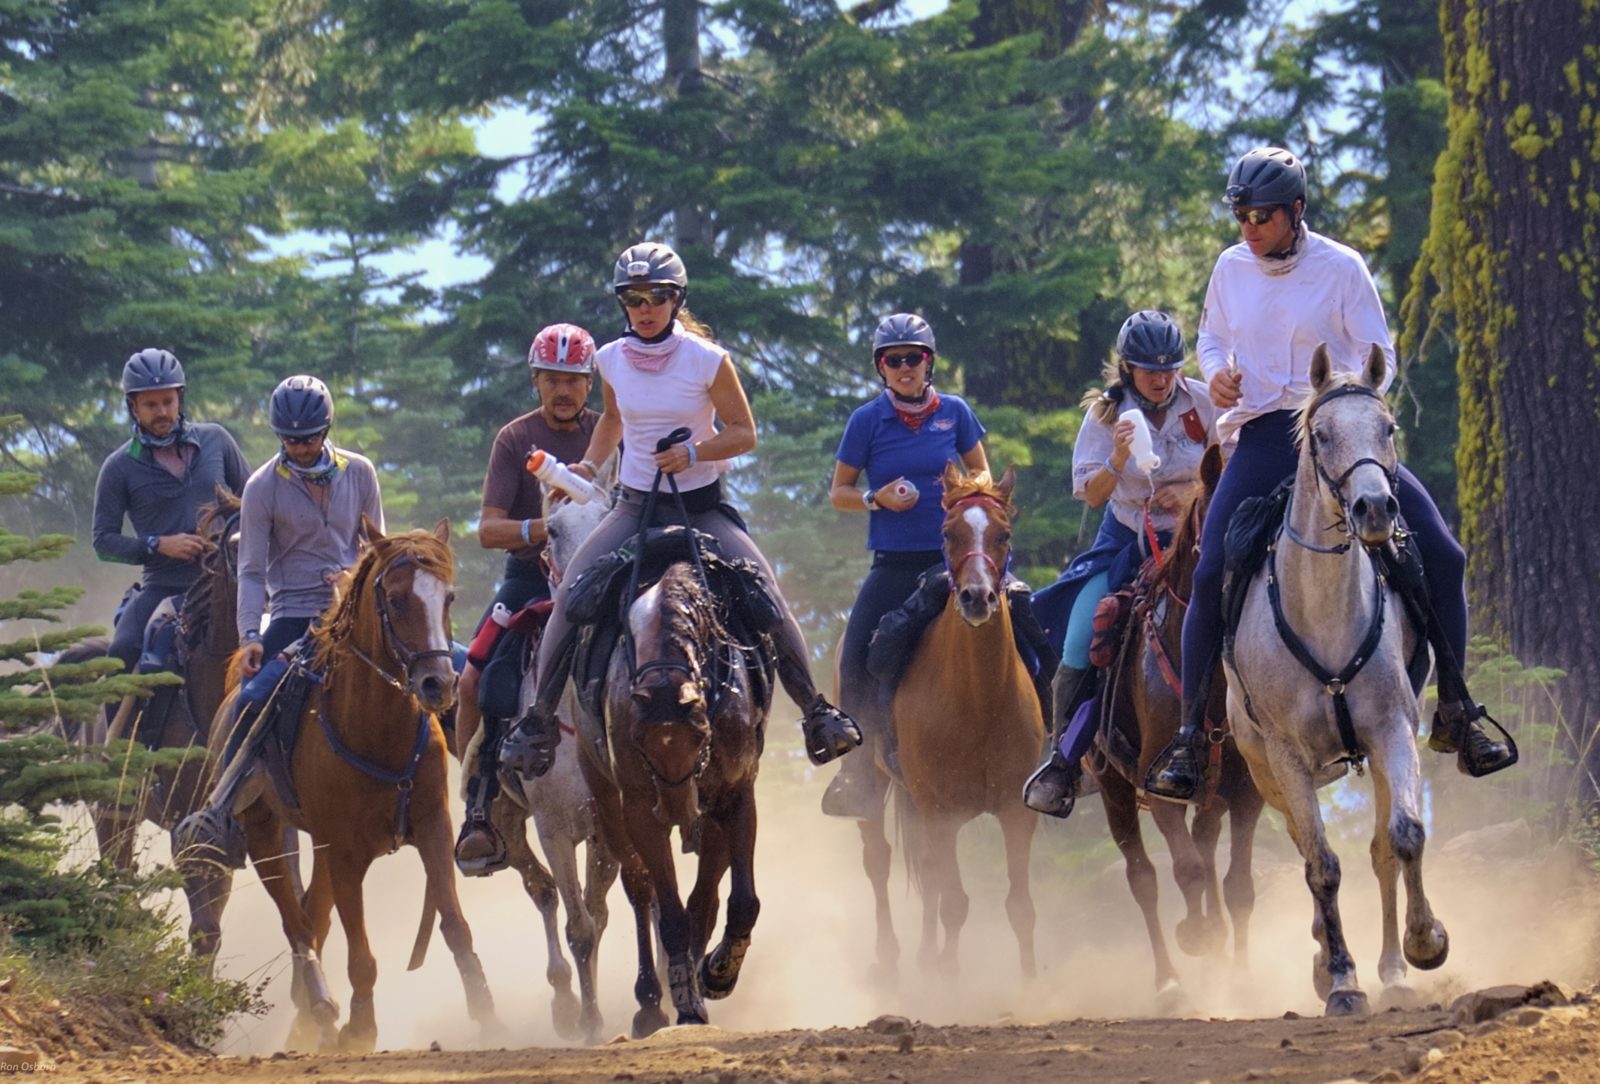 100Mile Tevis Cup One of the Top Ten Endurance Competitions in the